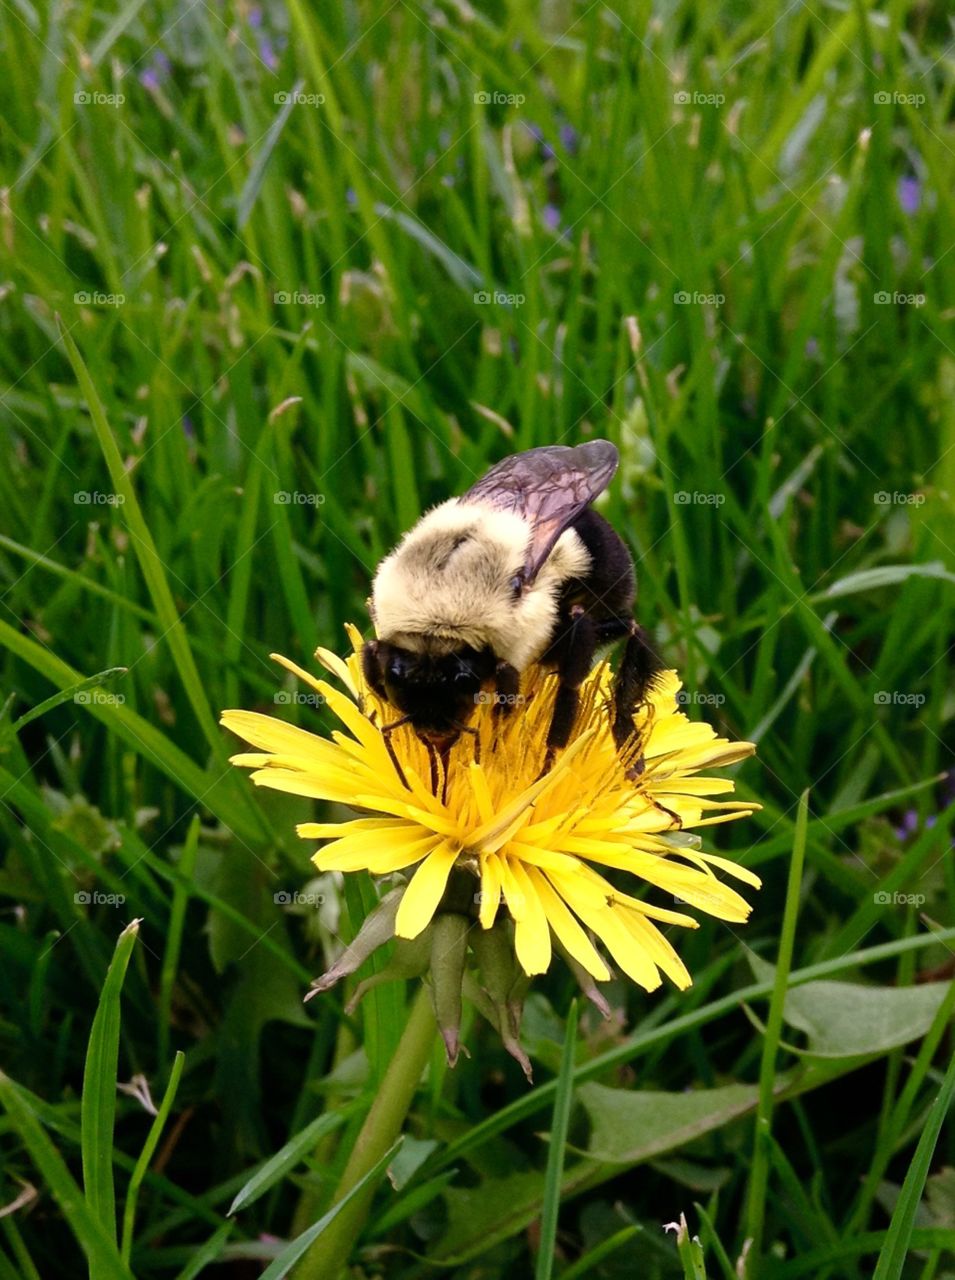 Bumble bee. Pollination nation